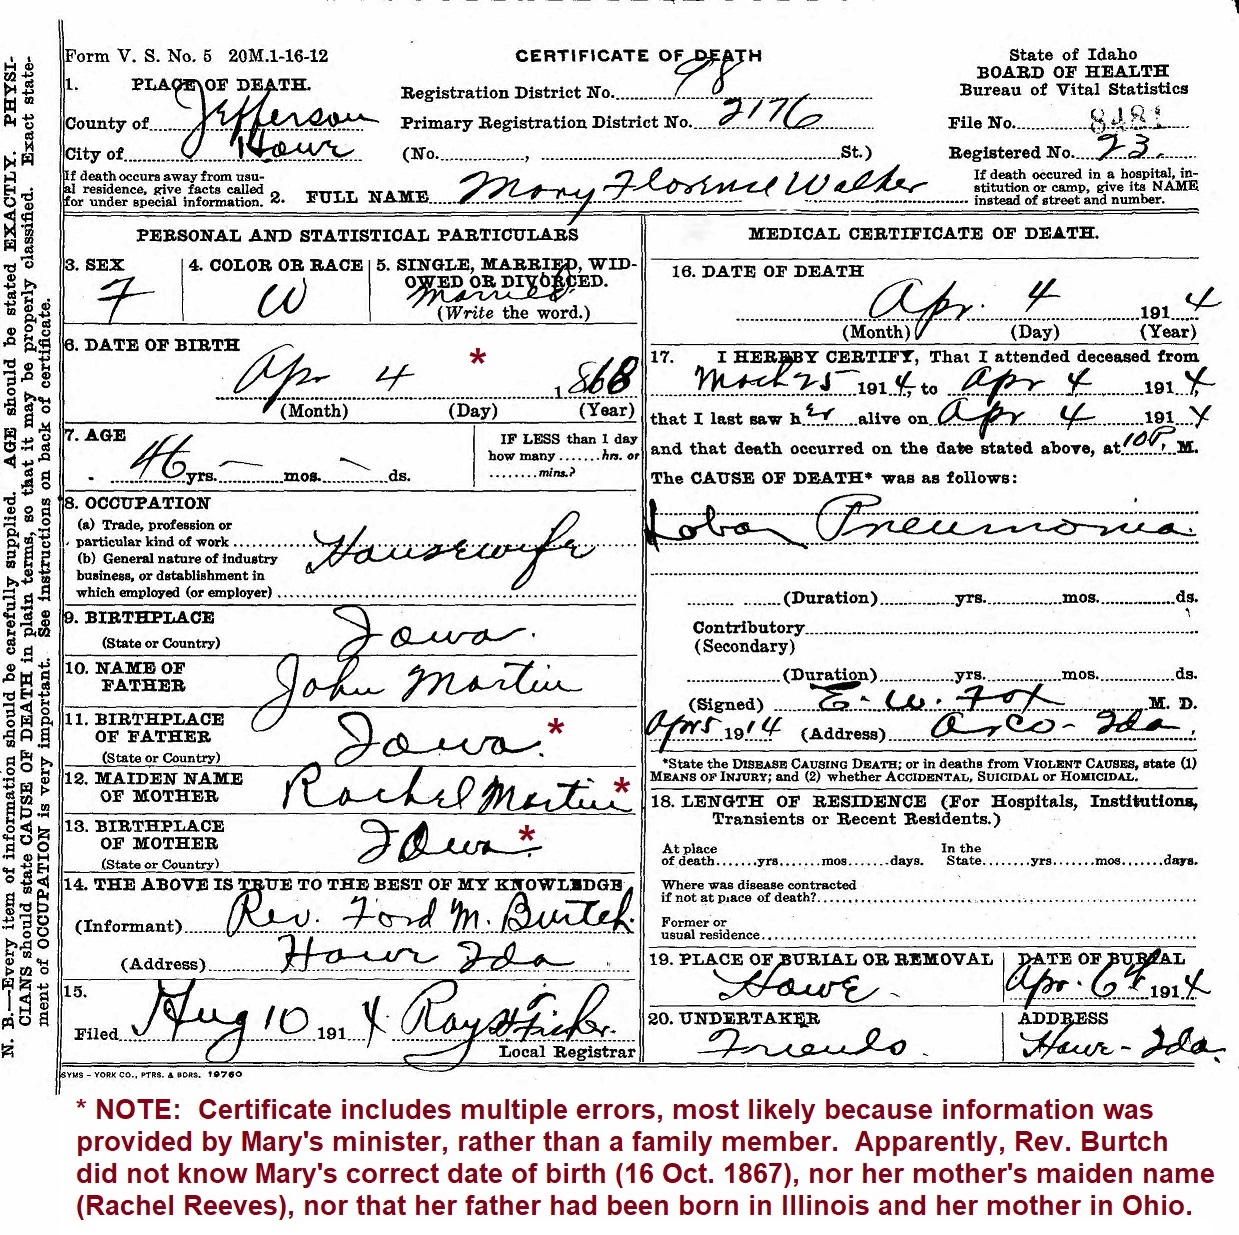 Death certificate for Mary Florence Walker issued by Jefferson County, Idaho.'